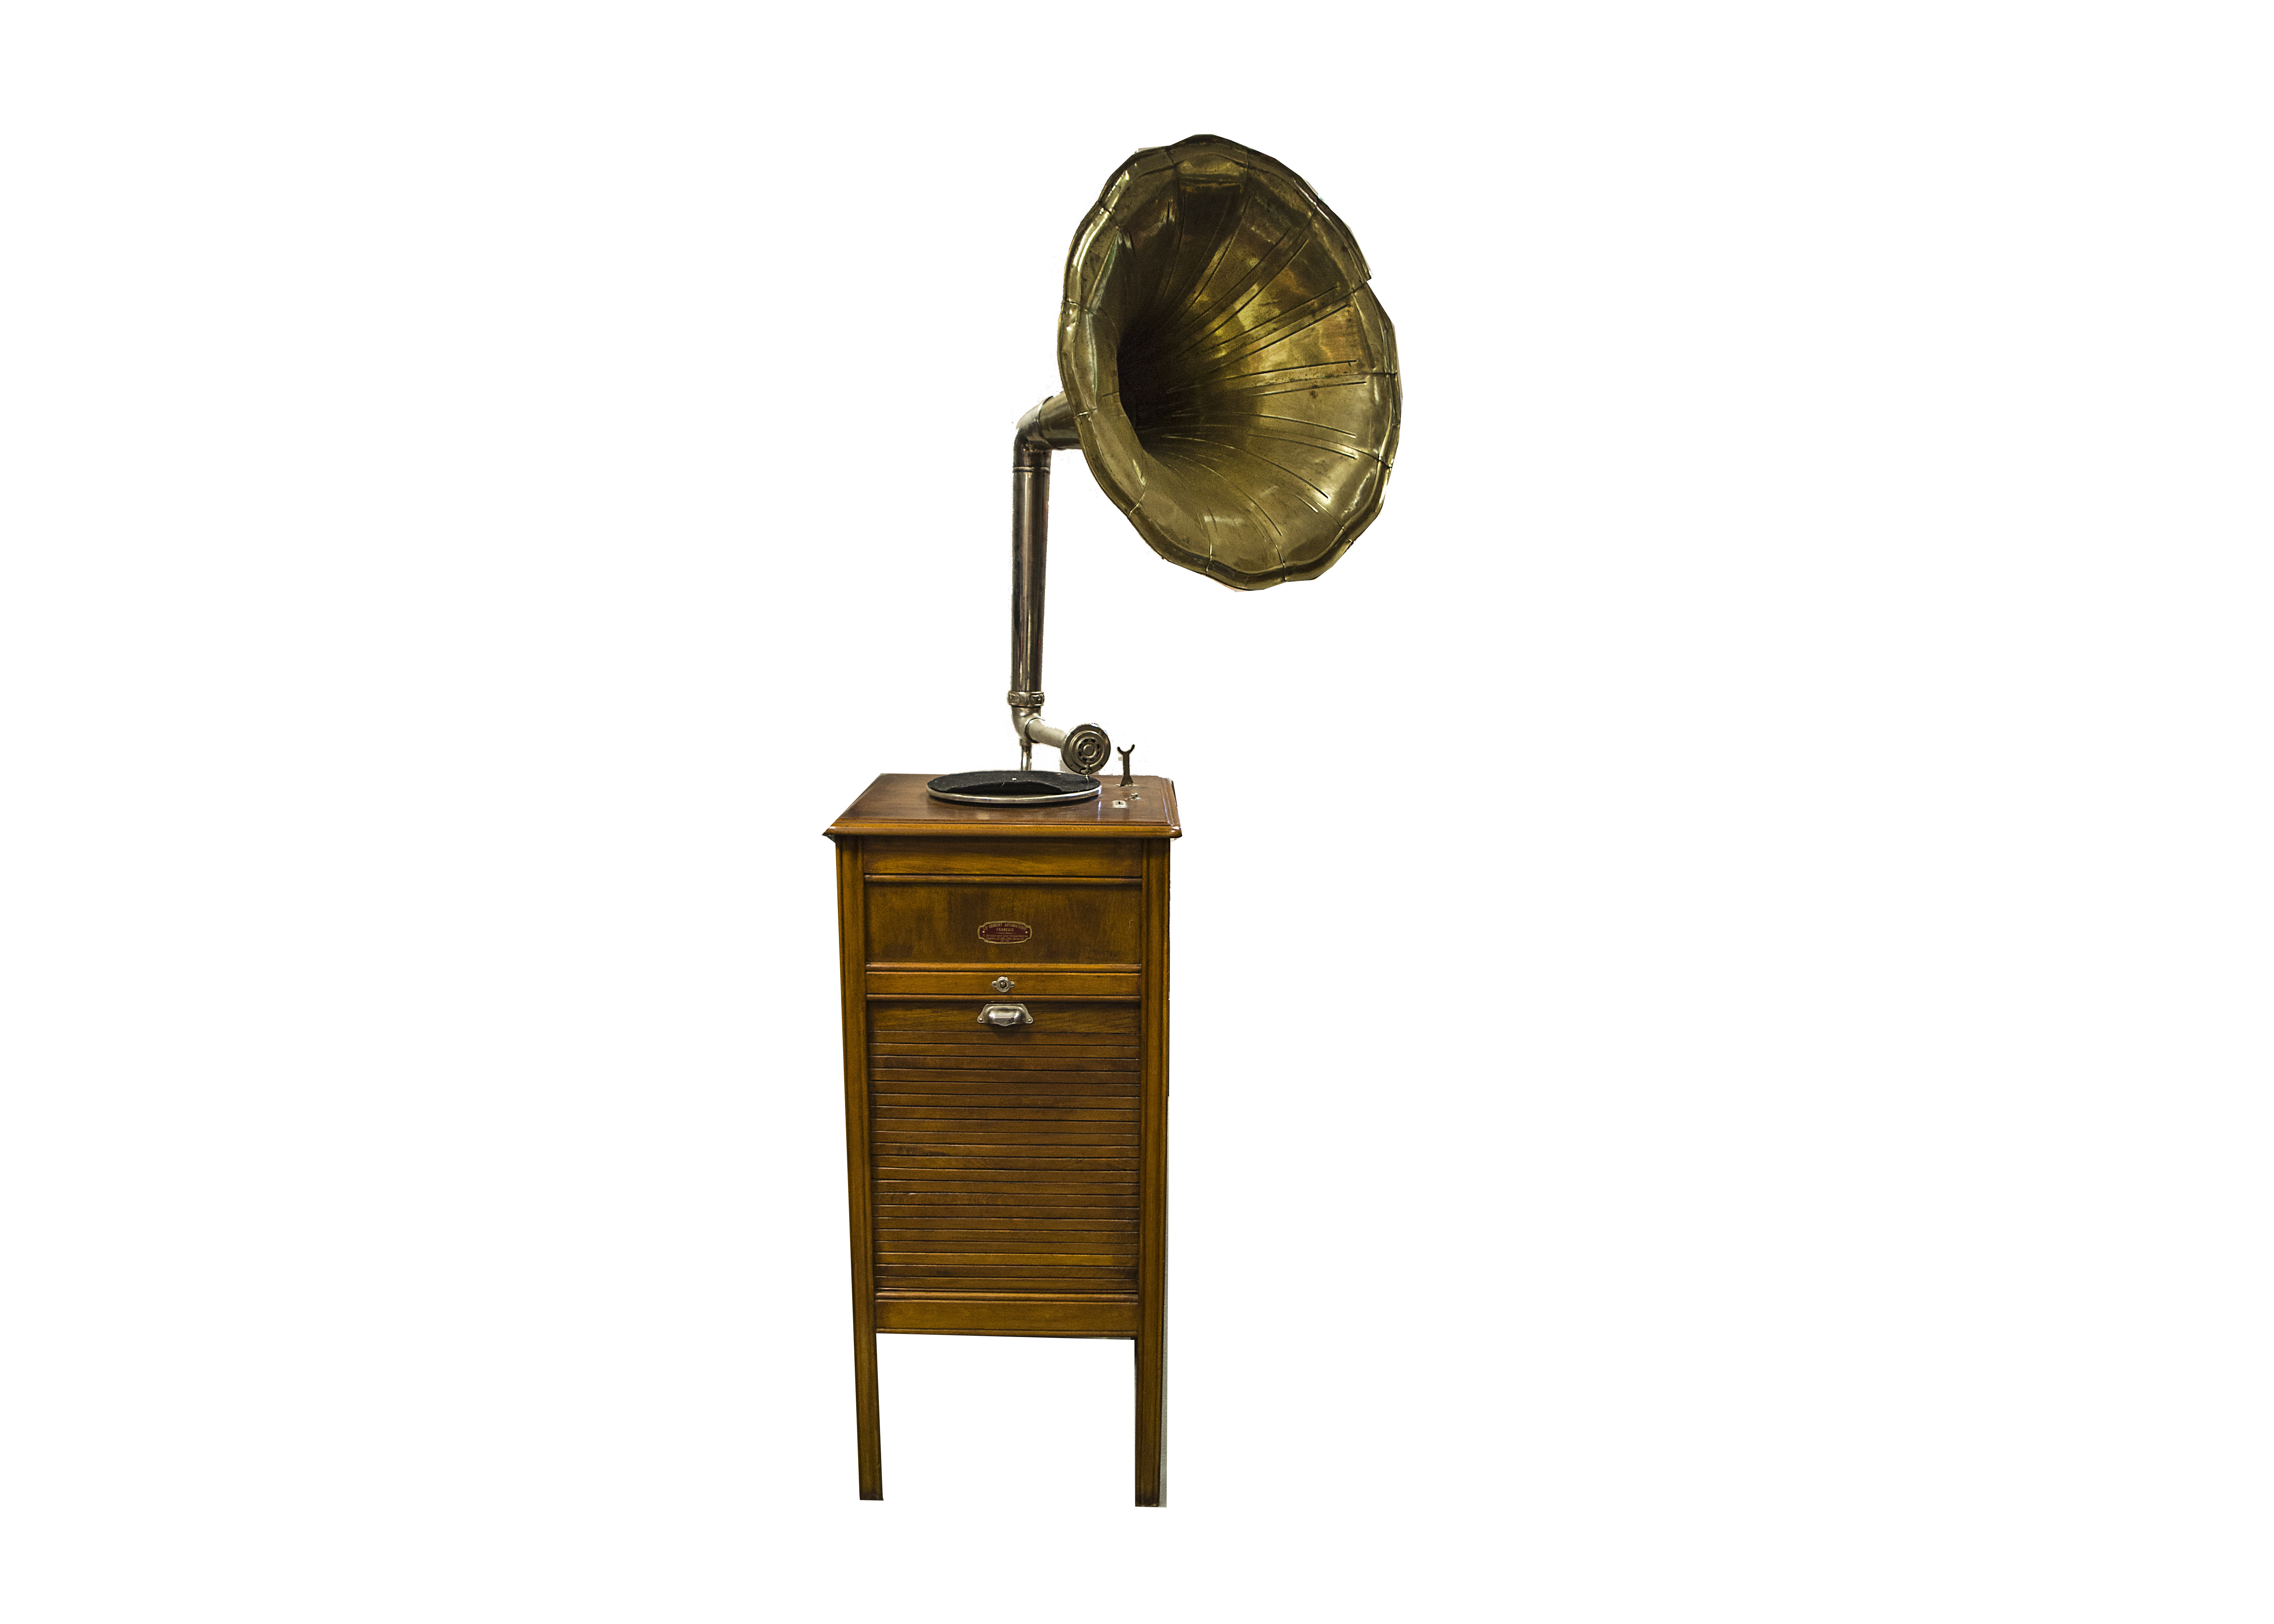 A coin-operated gramophone, a Concert Automatique Francais pedestal machine of Pathé type with large